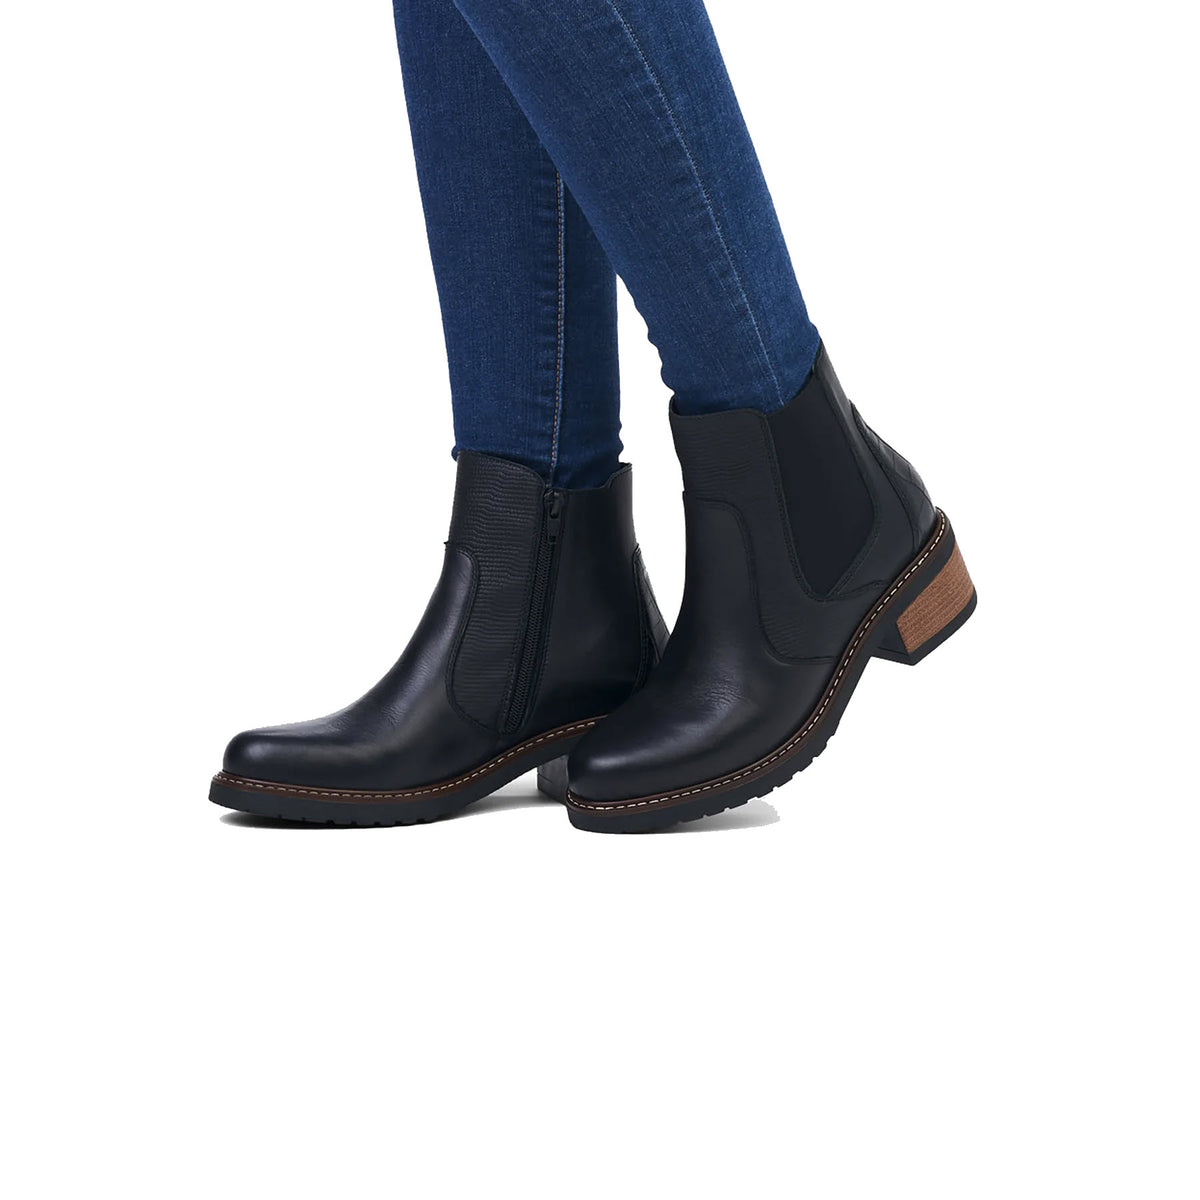 A person wearing dark blue jeans and Remonte Mixed Media Chelsea Bootie Black ankle boots, standing against a white background.